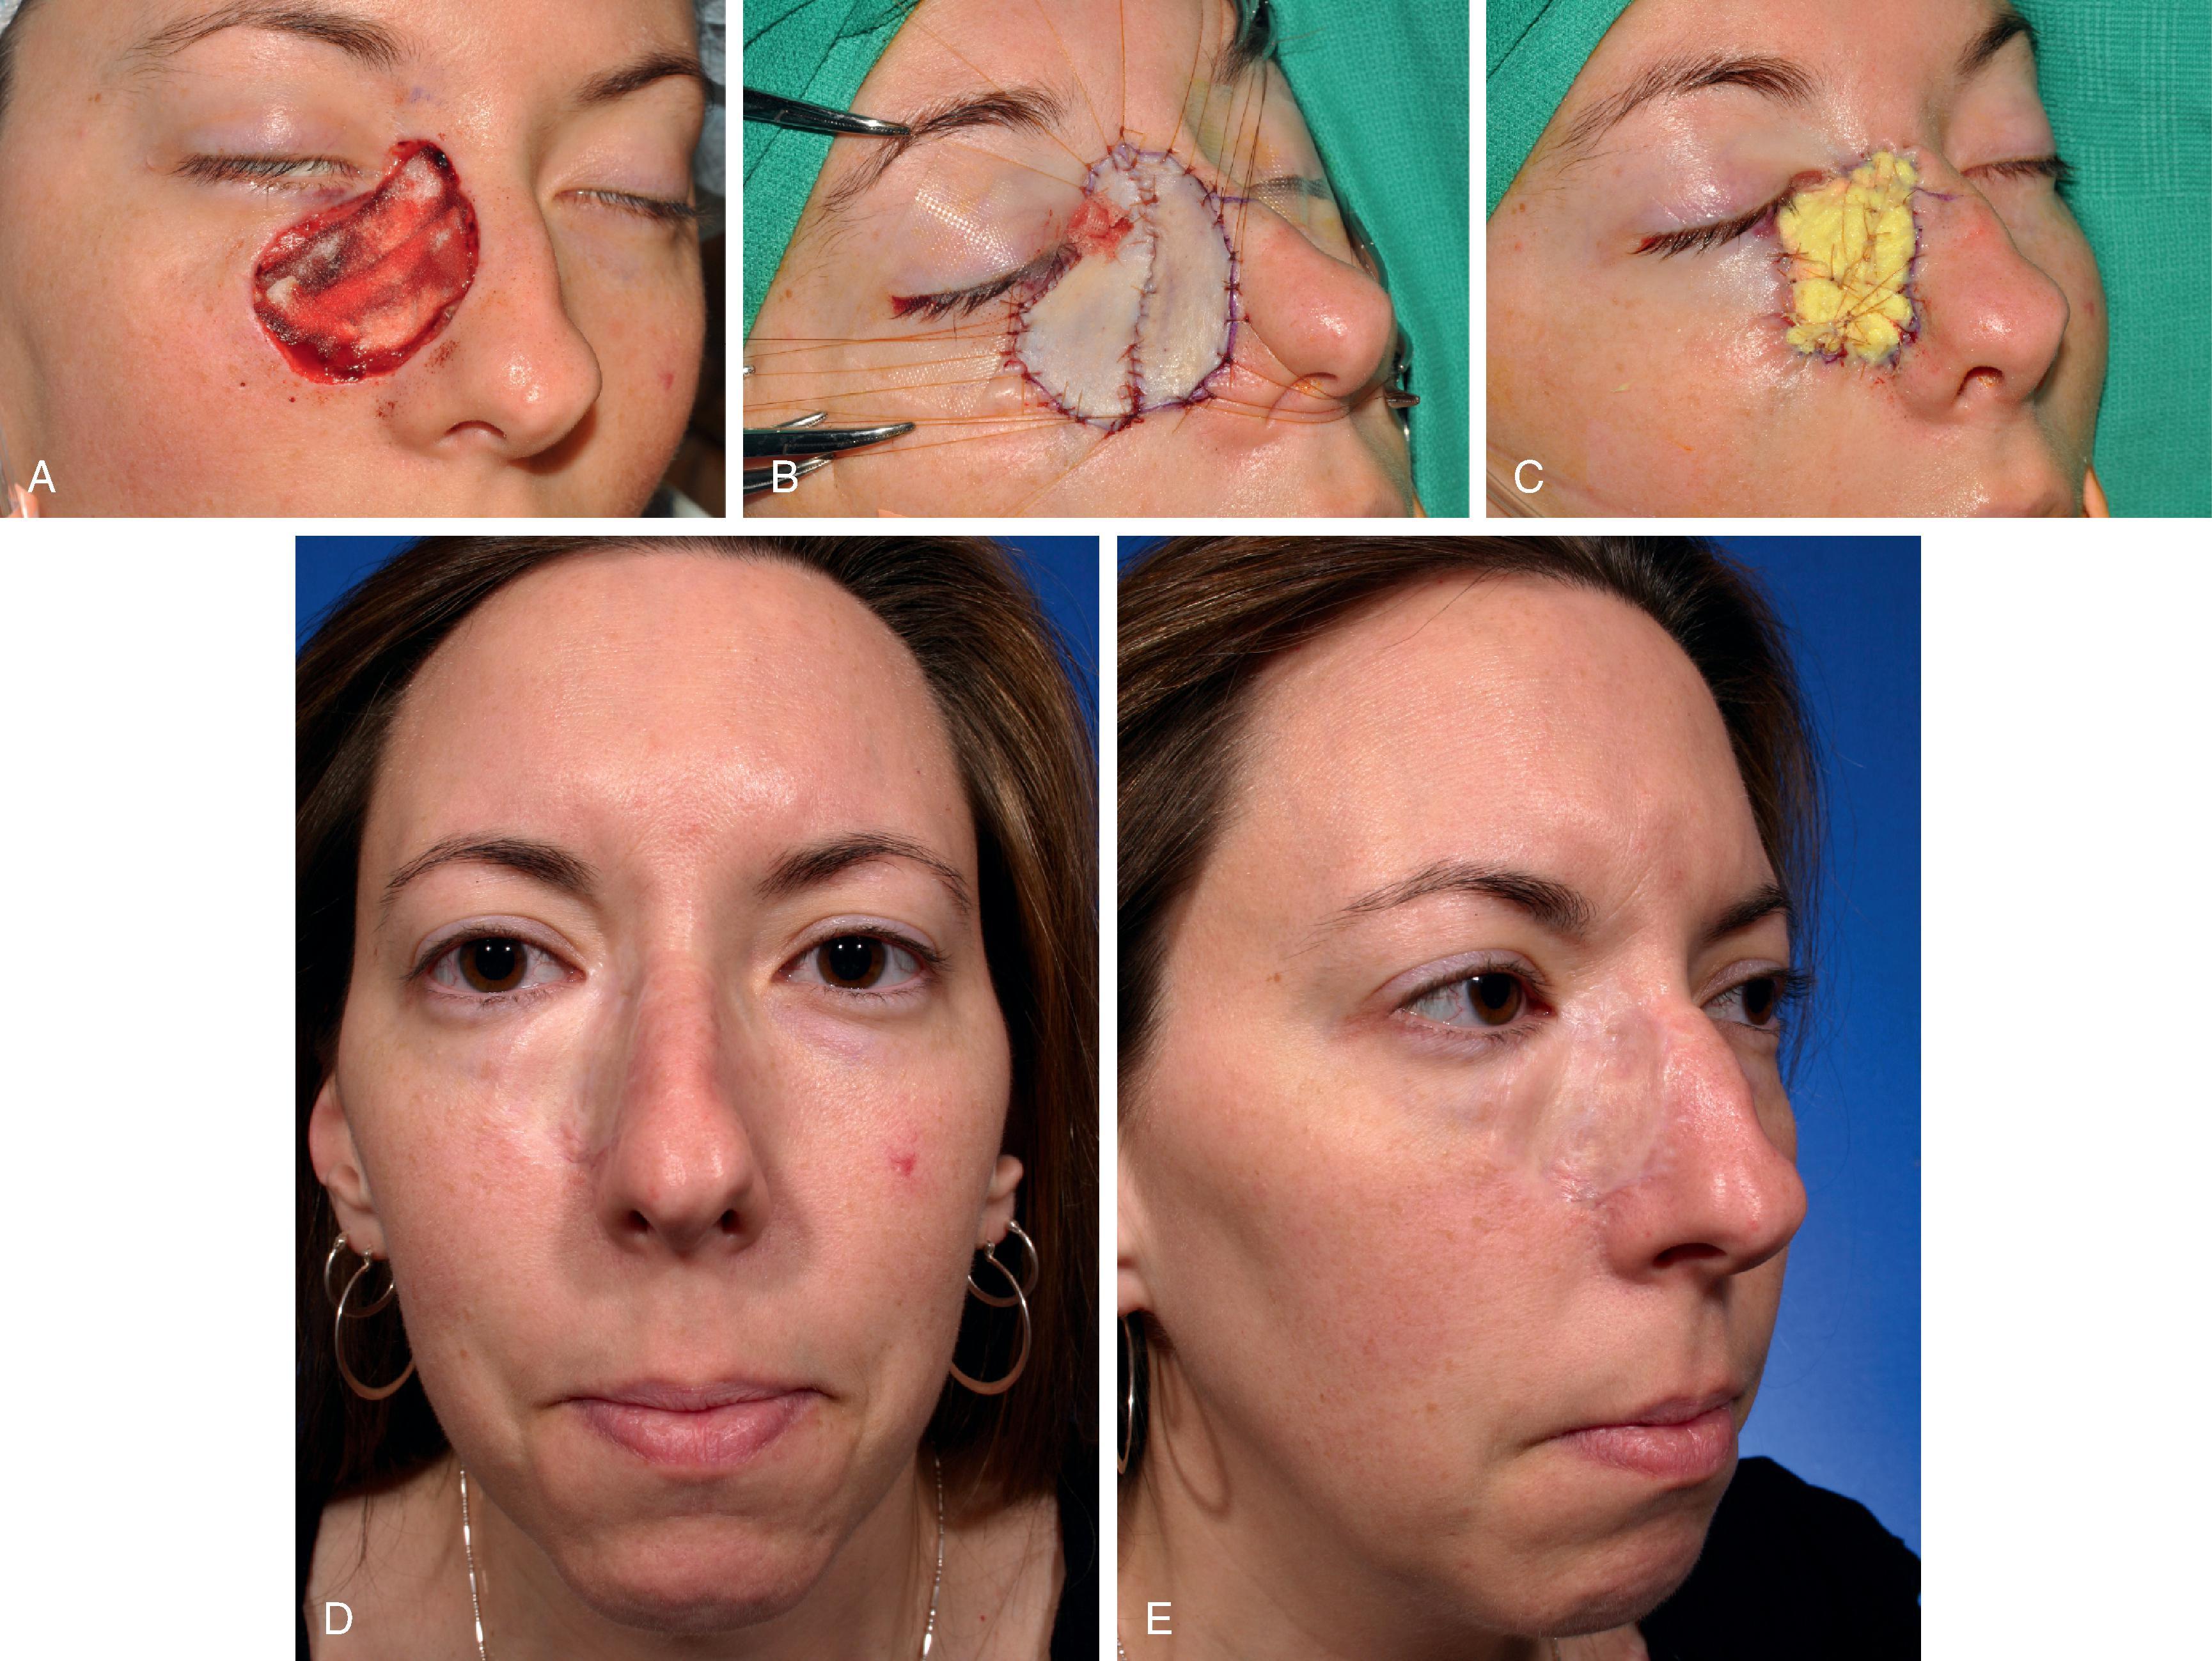 FIG. 15.1, A , A 4.5 × 4.2 cm skin defect after micrographic excision of basal cell carcinoma in a 34-year-old woman. B , C , Repair with full-thickness skin graft from supraclavicular fossa. D , E , Eleven months postoperative. No revision surgery performed. Graft has poor color and textural match with facial skin. (Courtesy Shan R. Baker, MD.)